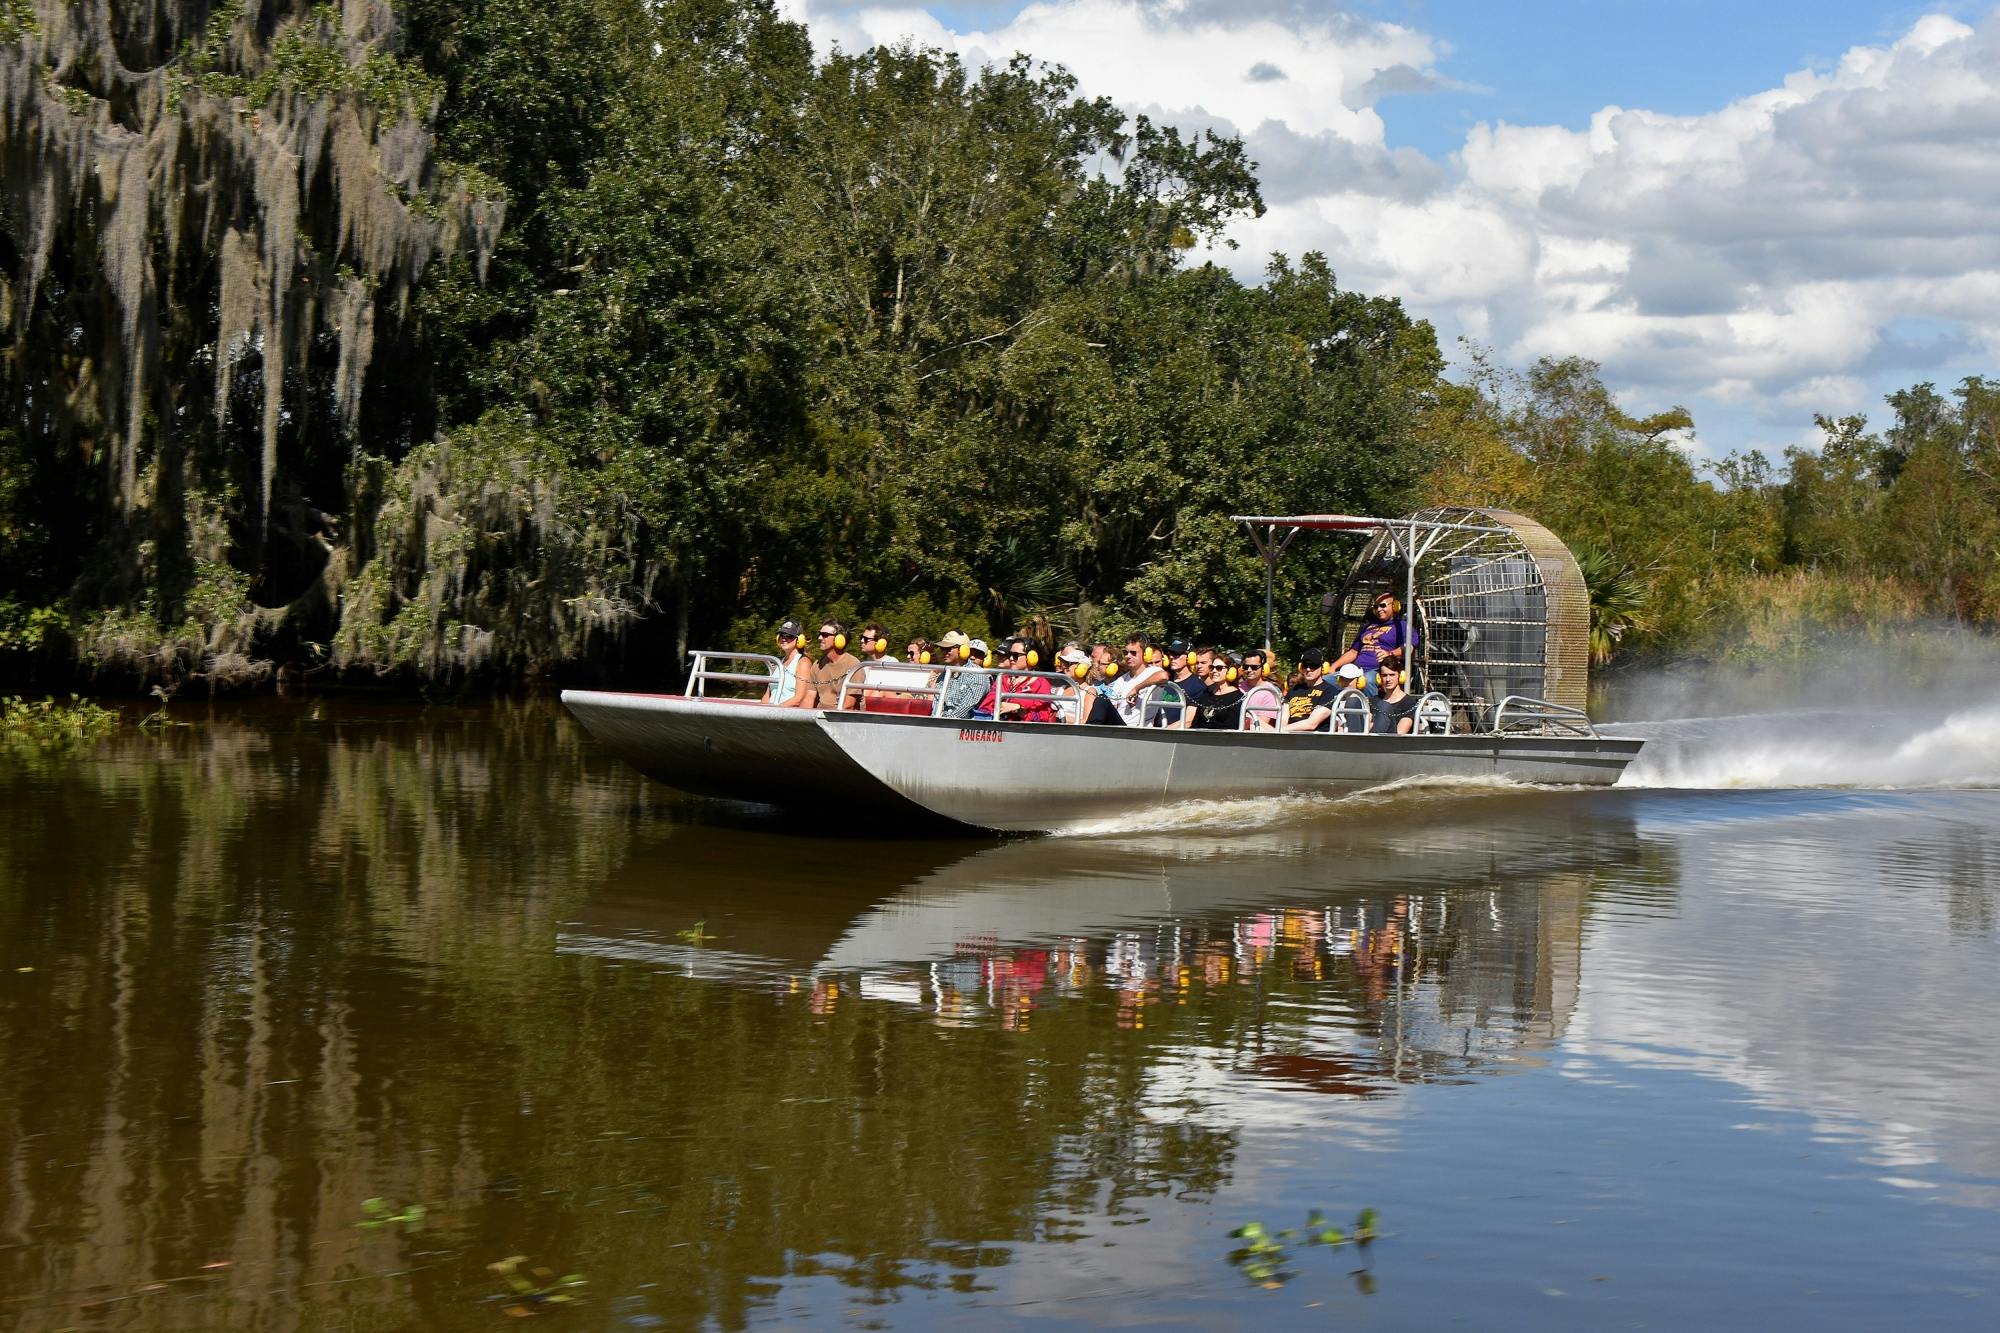 Airboat ride through the New Orleans wetlands